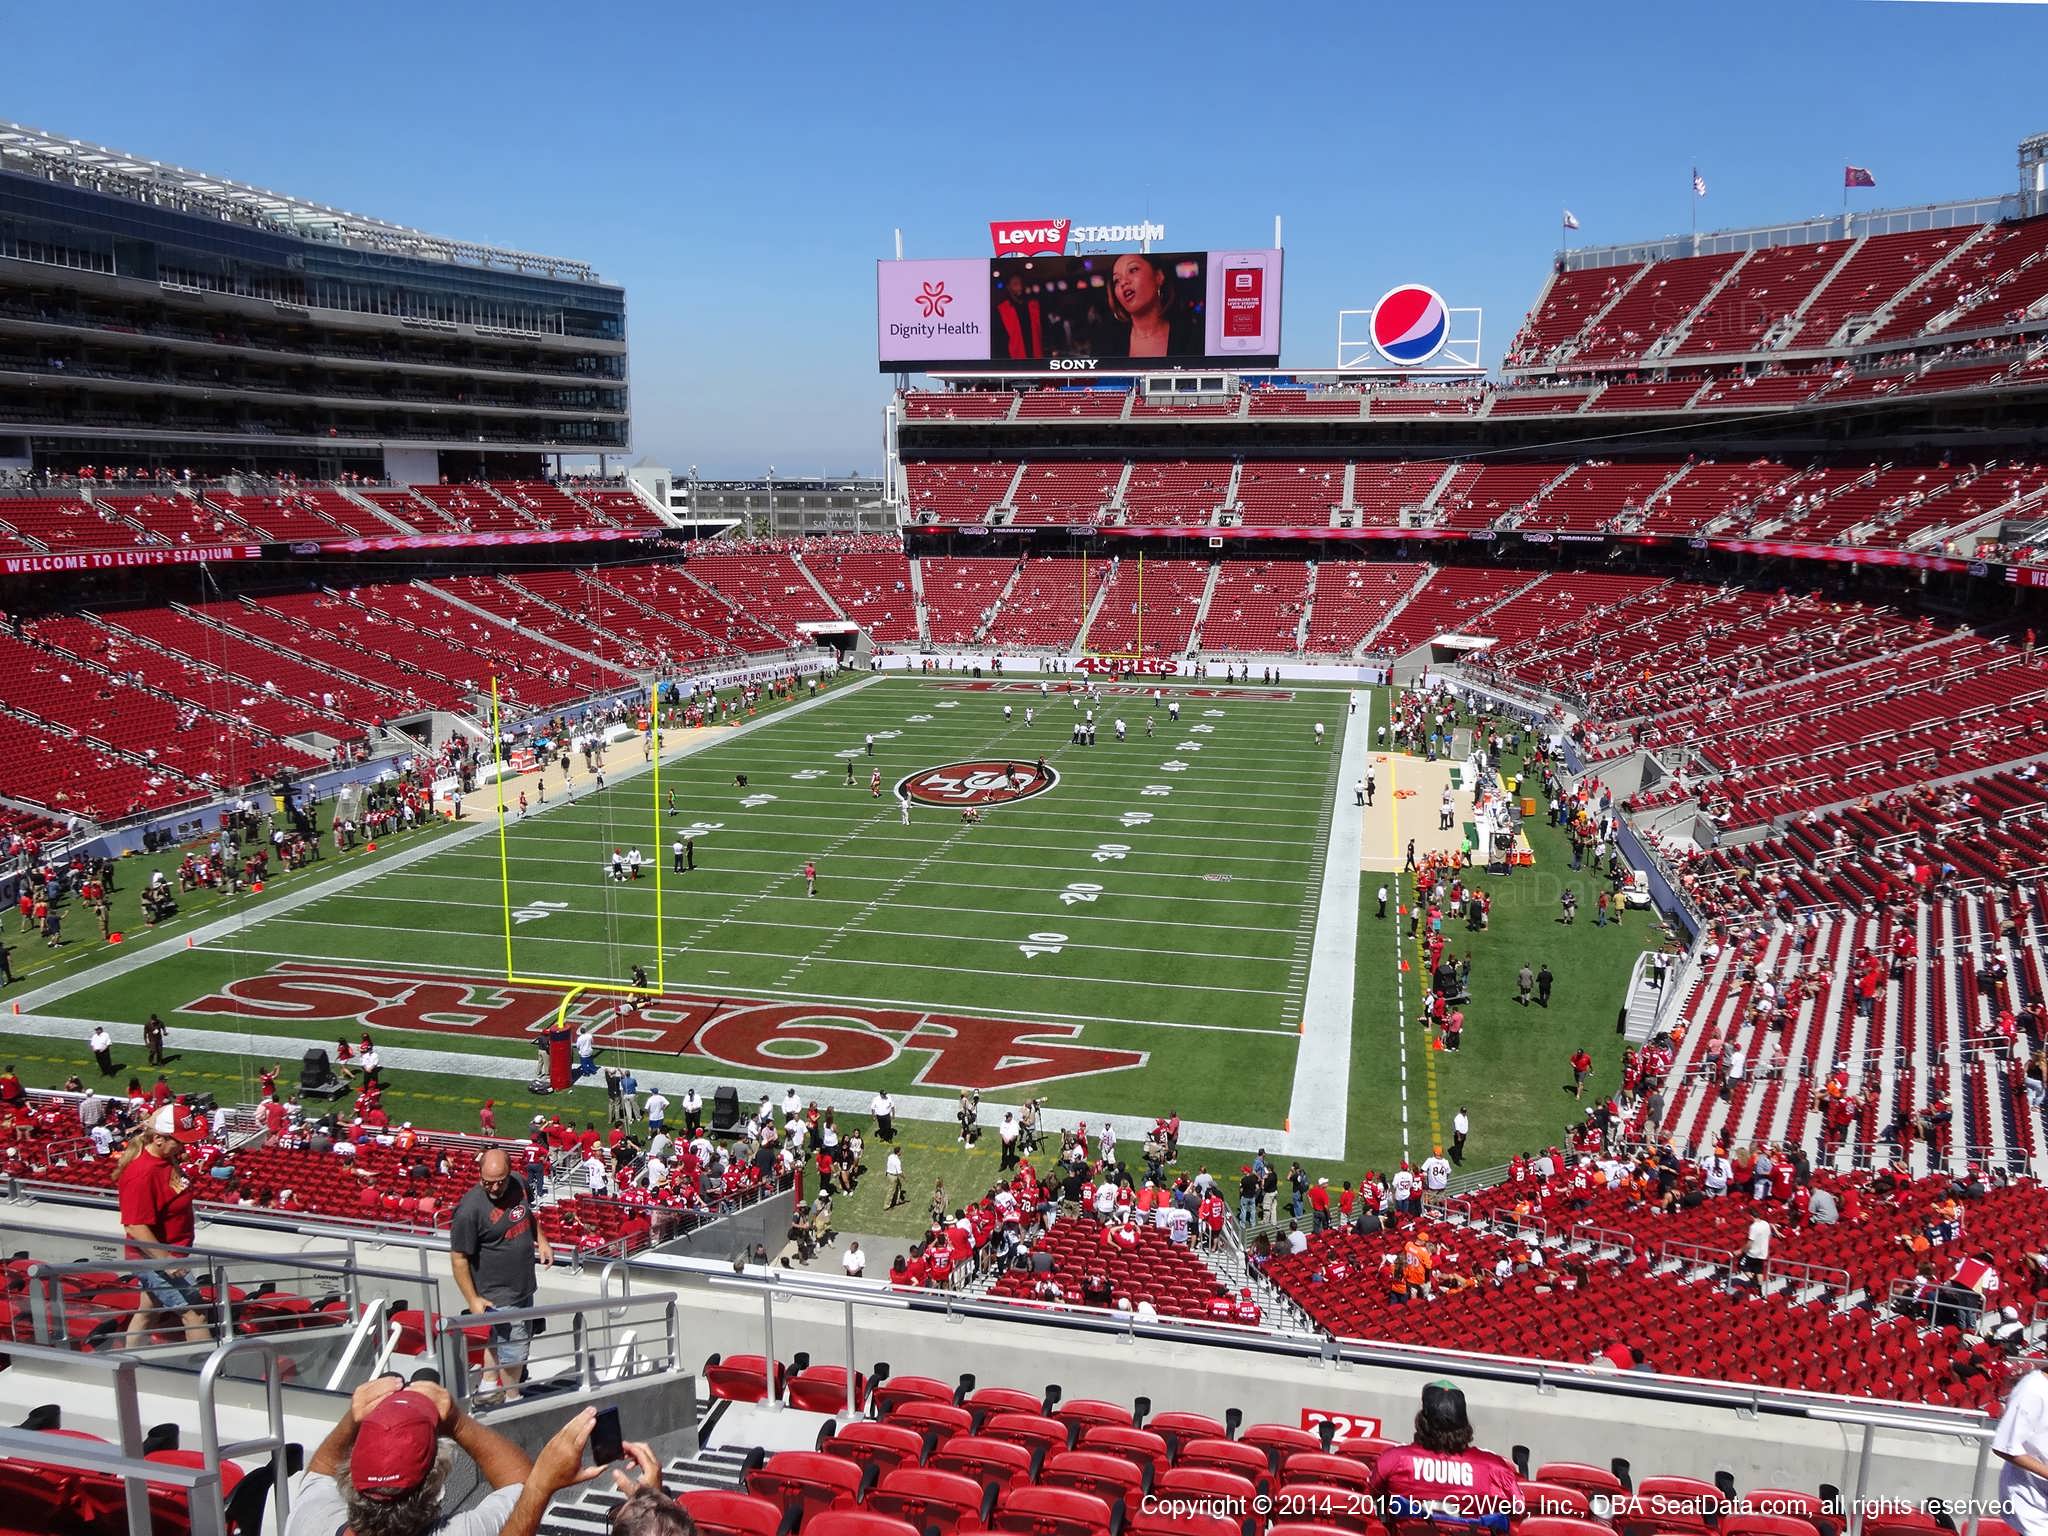 Seat view from section 227 at Levi’s Stadium, home of the San Francisco 49ers